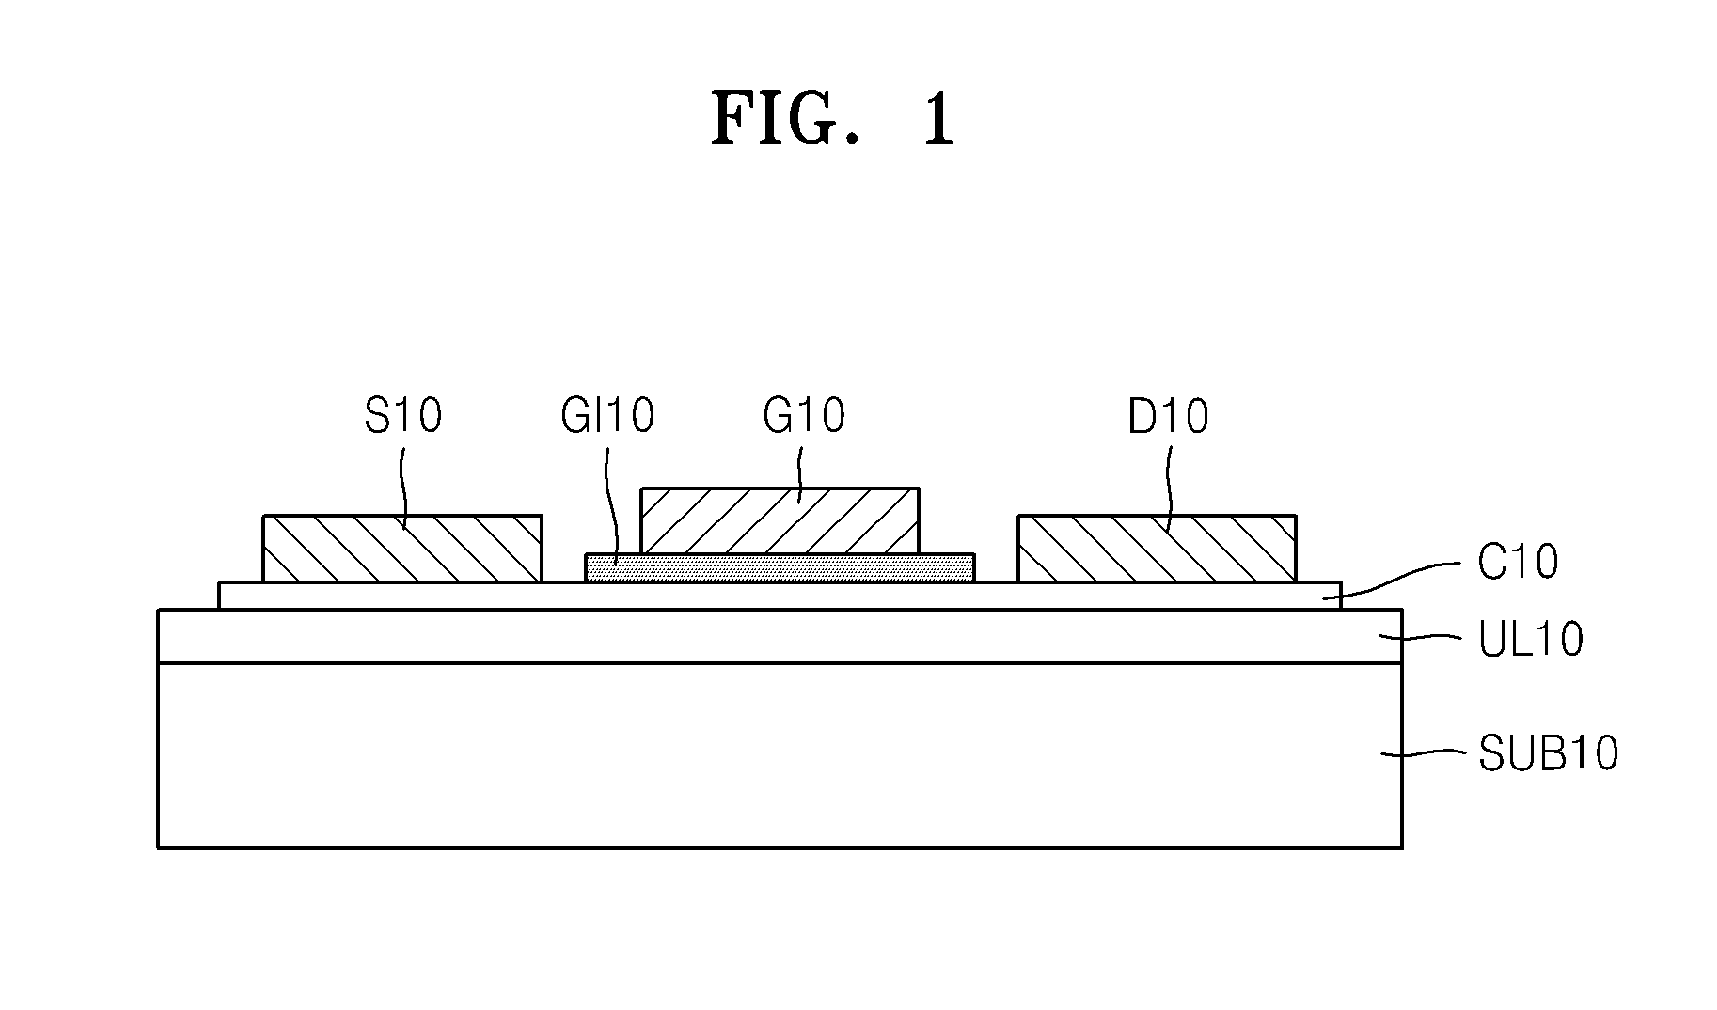 Transistors and methods of manufacturing the same